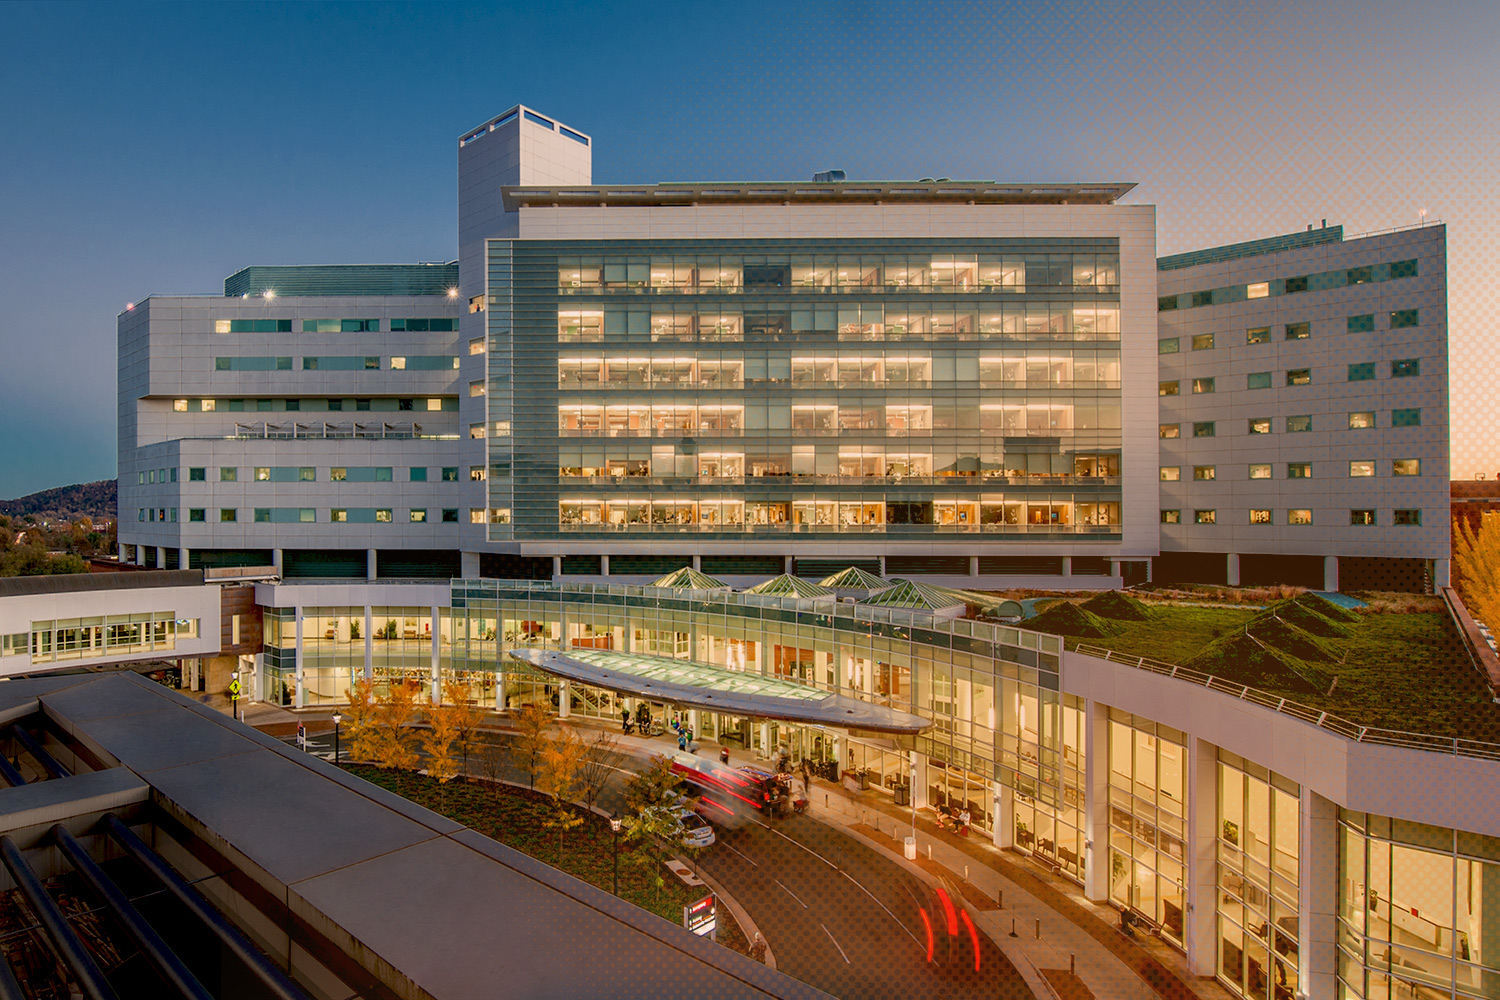 Aerial view of the UVA Hospital at dusk with lights on